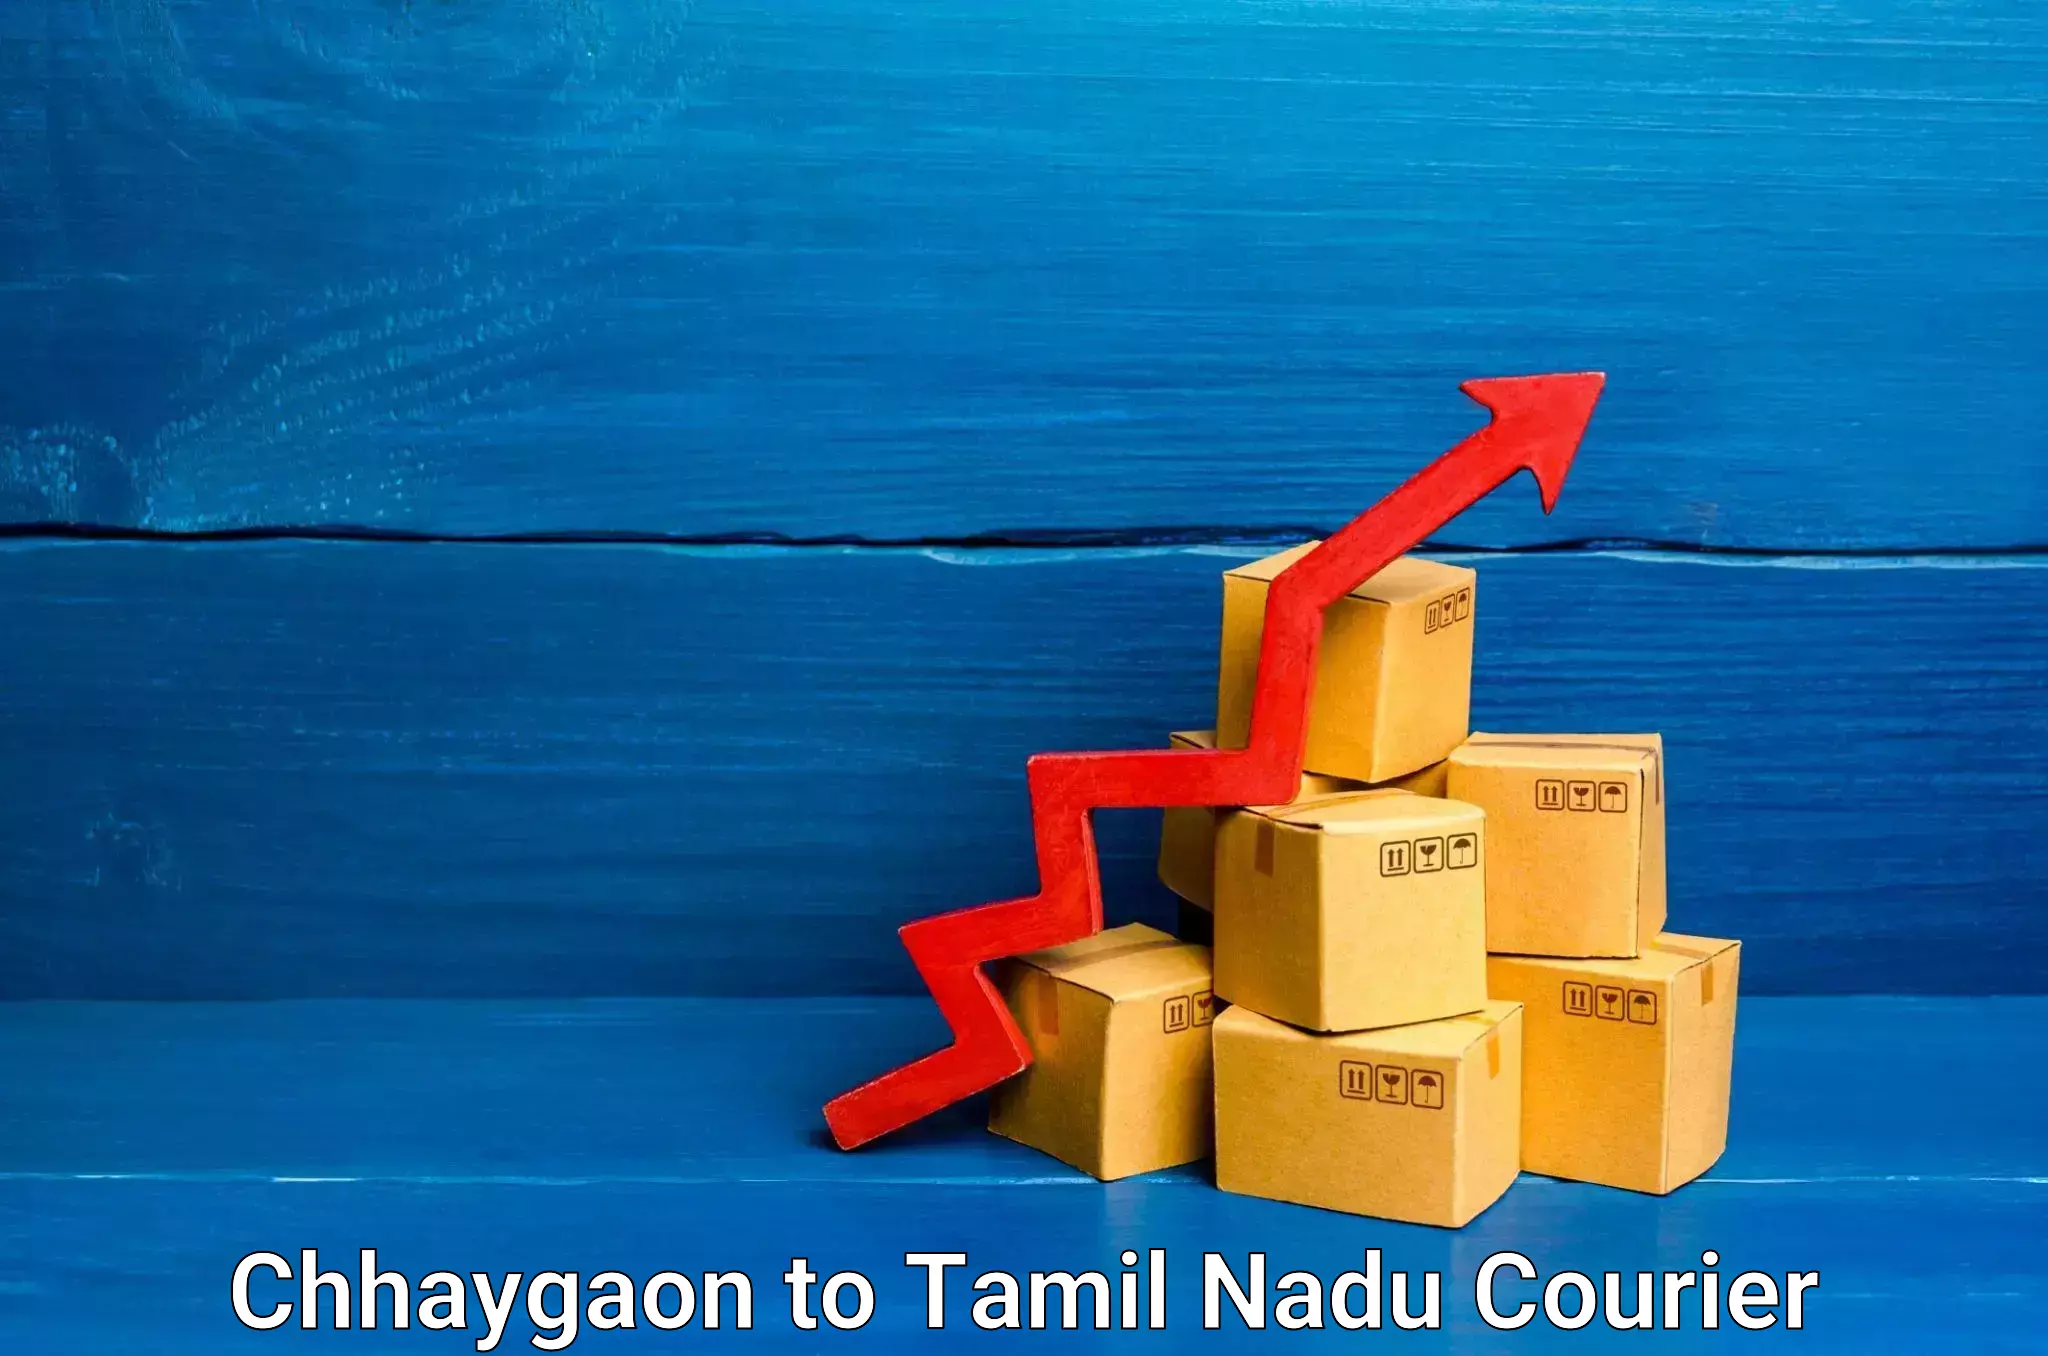 Package delivery network Chhaygaon to IIIT Tiruchirappalli